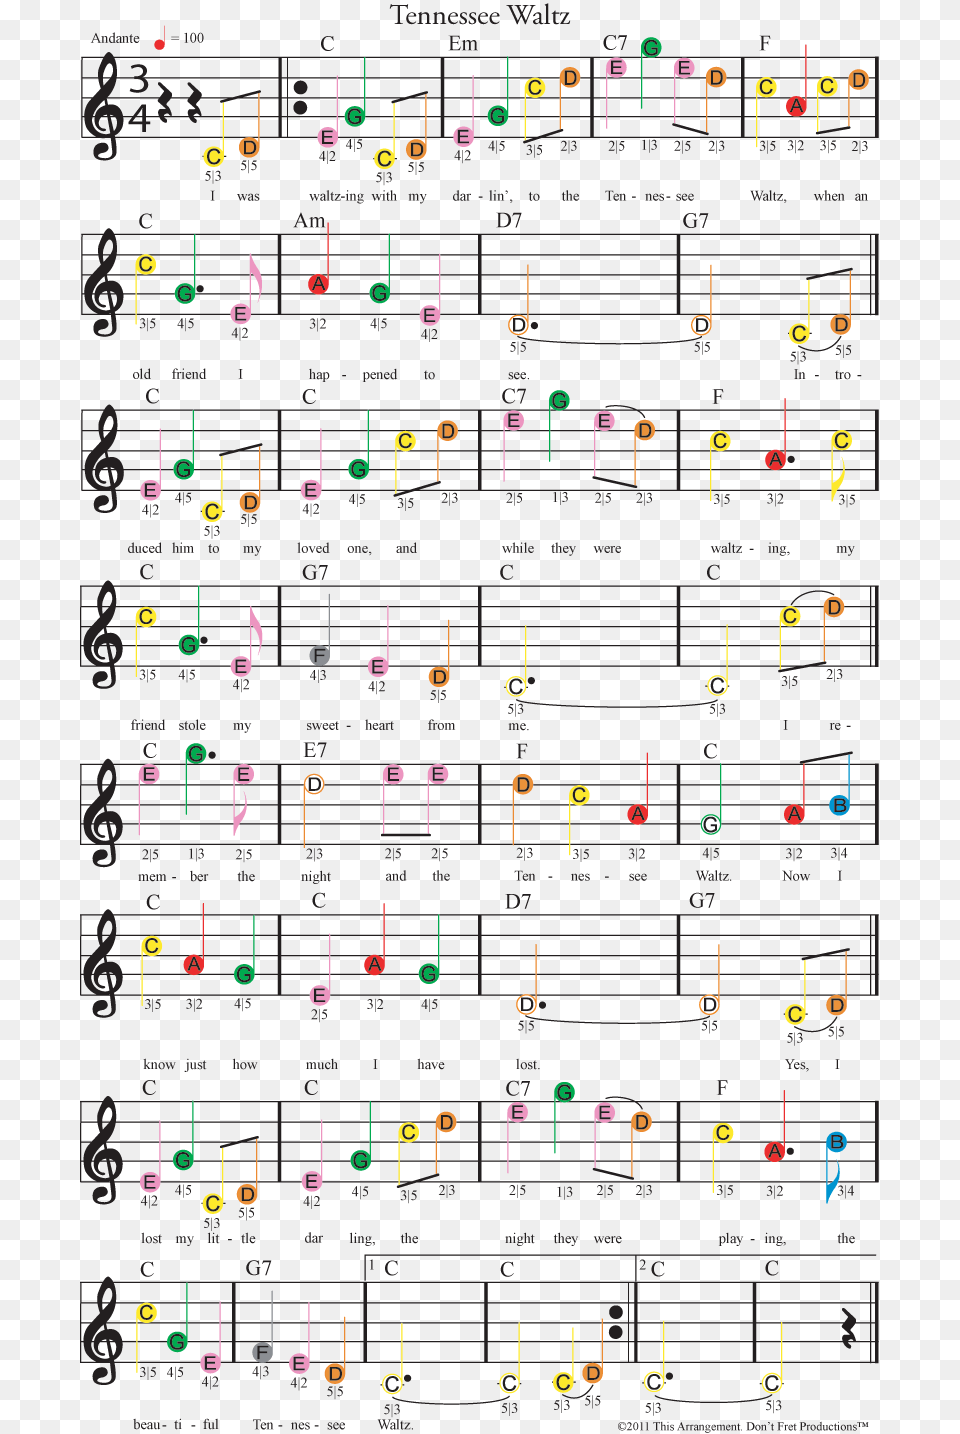 Easy Guitar Sheet Music For Tennessee Waltz Featuring Sheet Music, Sheet Music Free Png Download